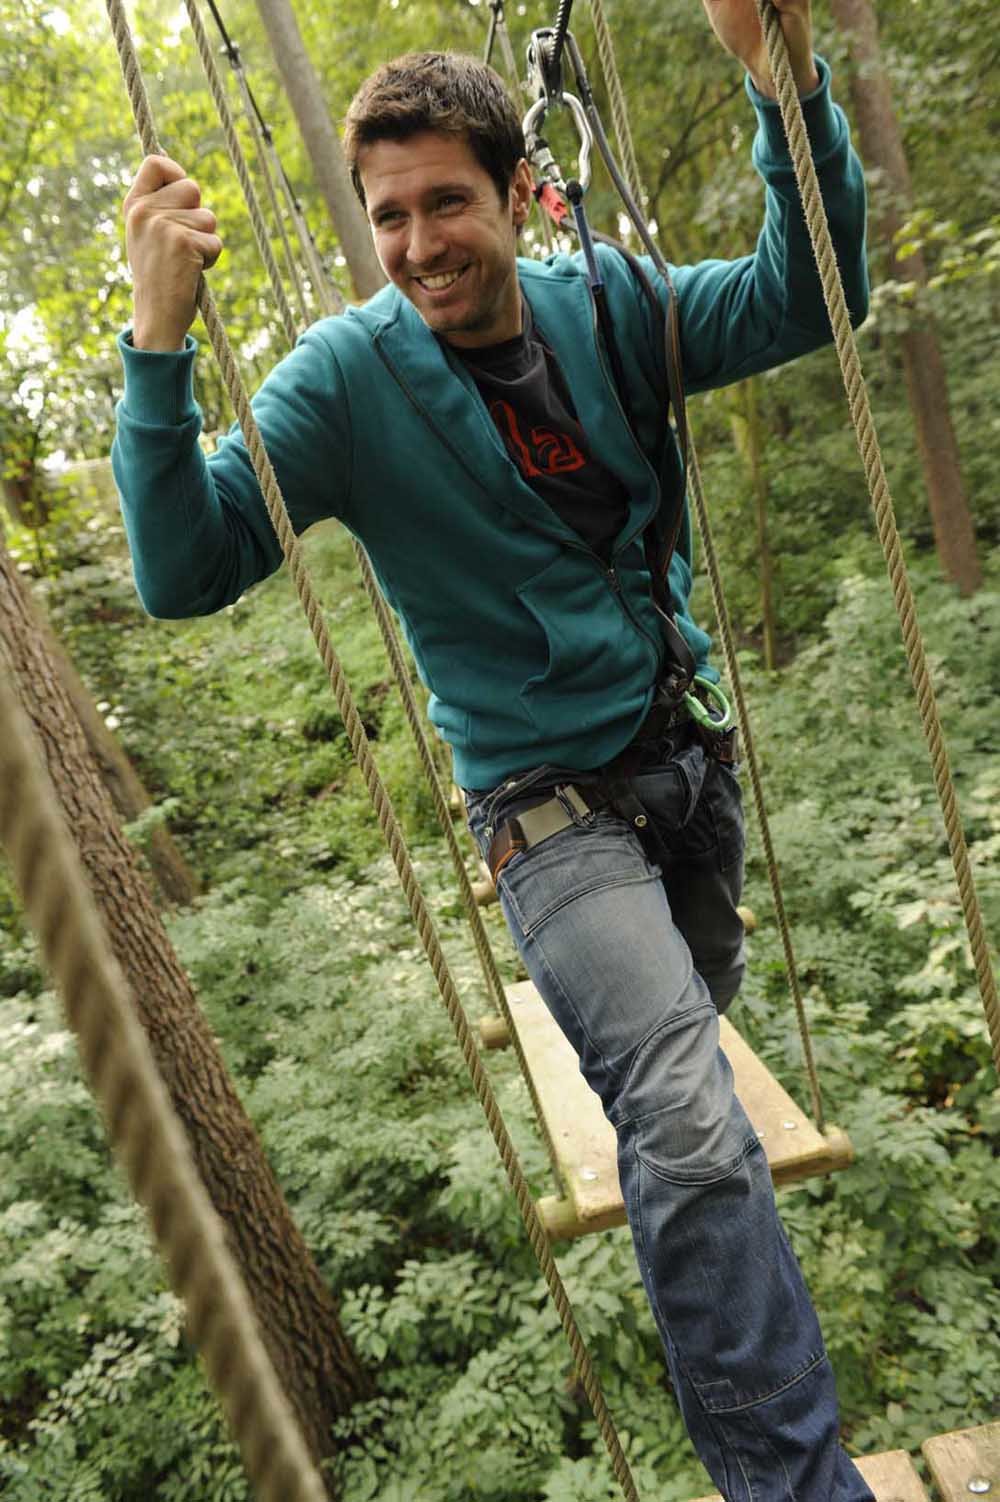 A man stepping stones on the zipline course